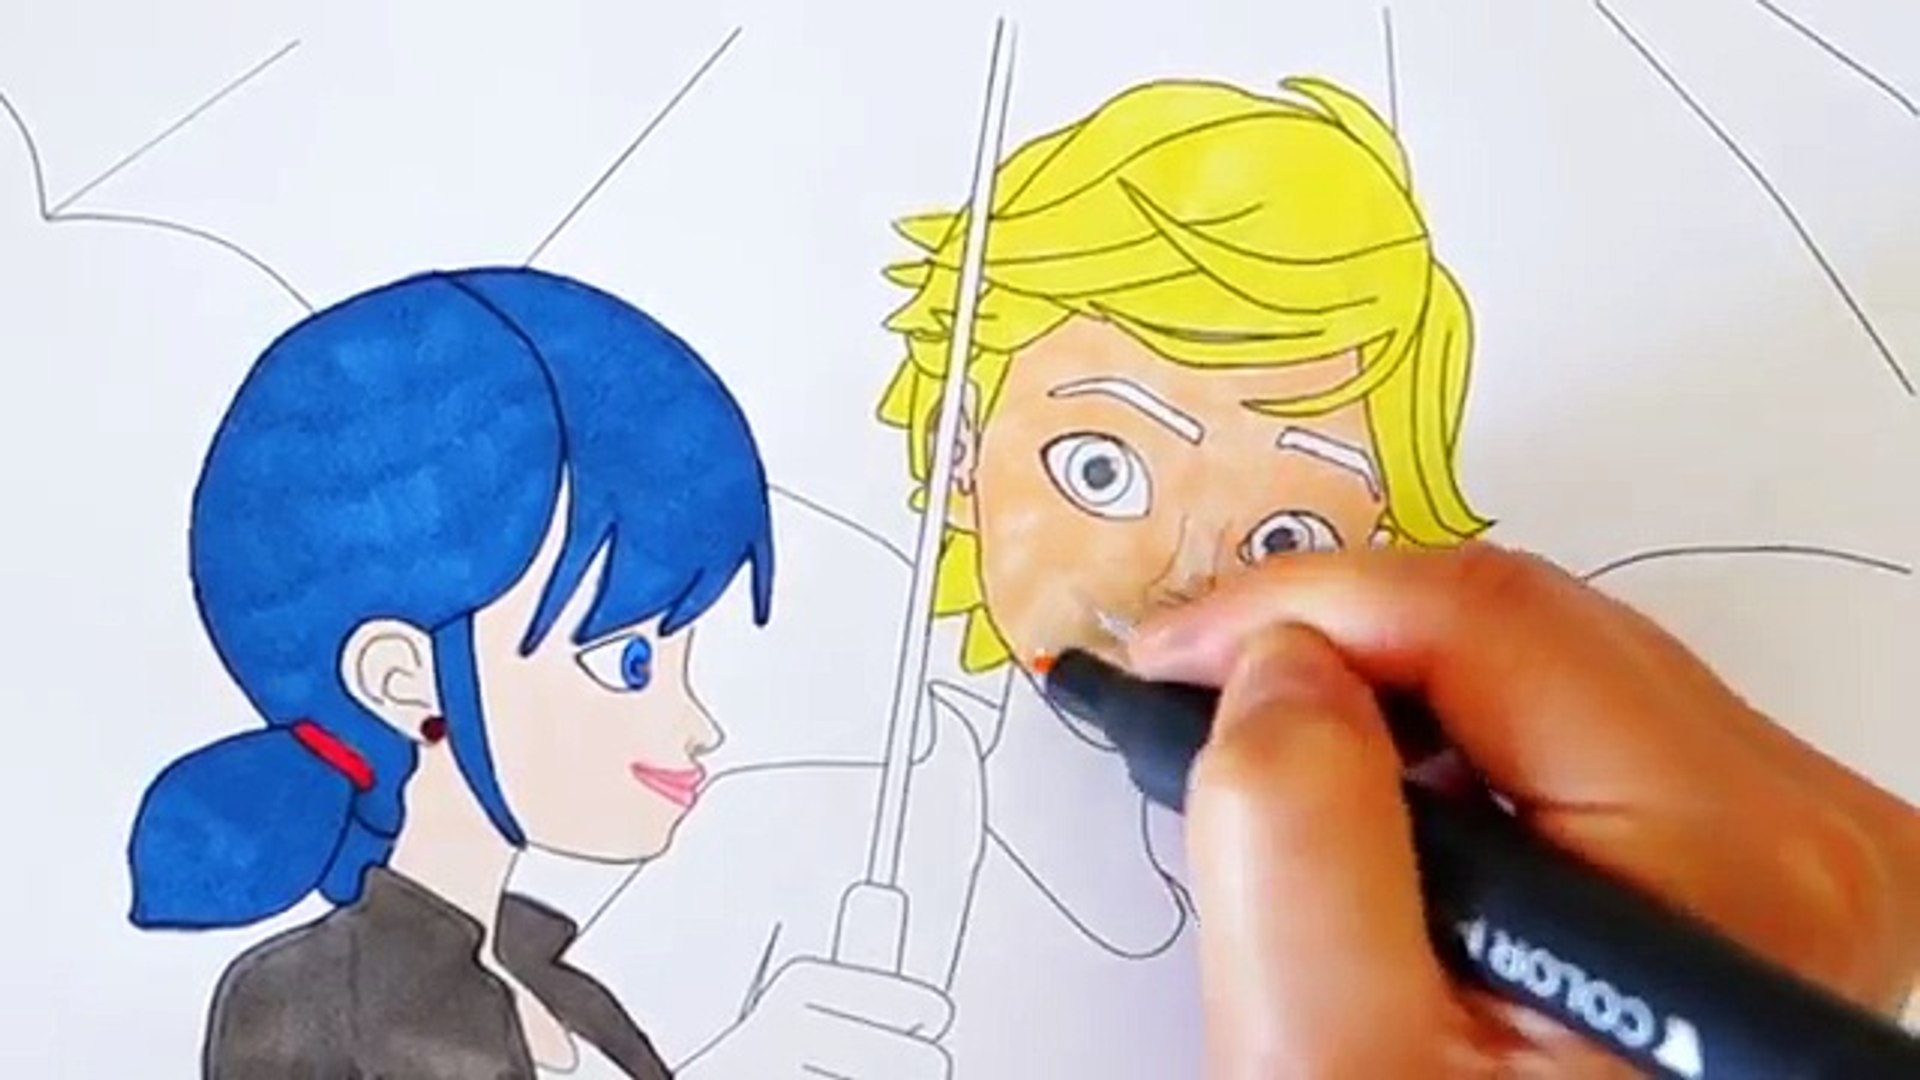 Miraculous Ladybug And Cat Noir Coloring Book Pages Marinette And Adrien Umbrella Scene Kids Art Video Dailymotion